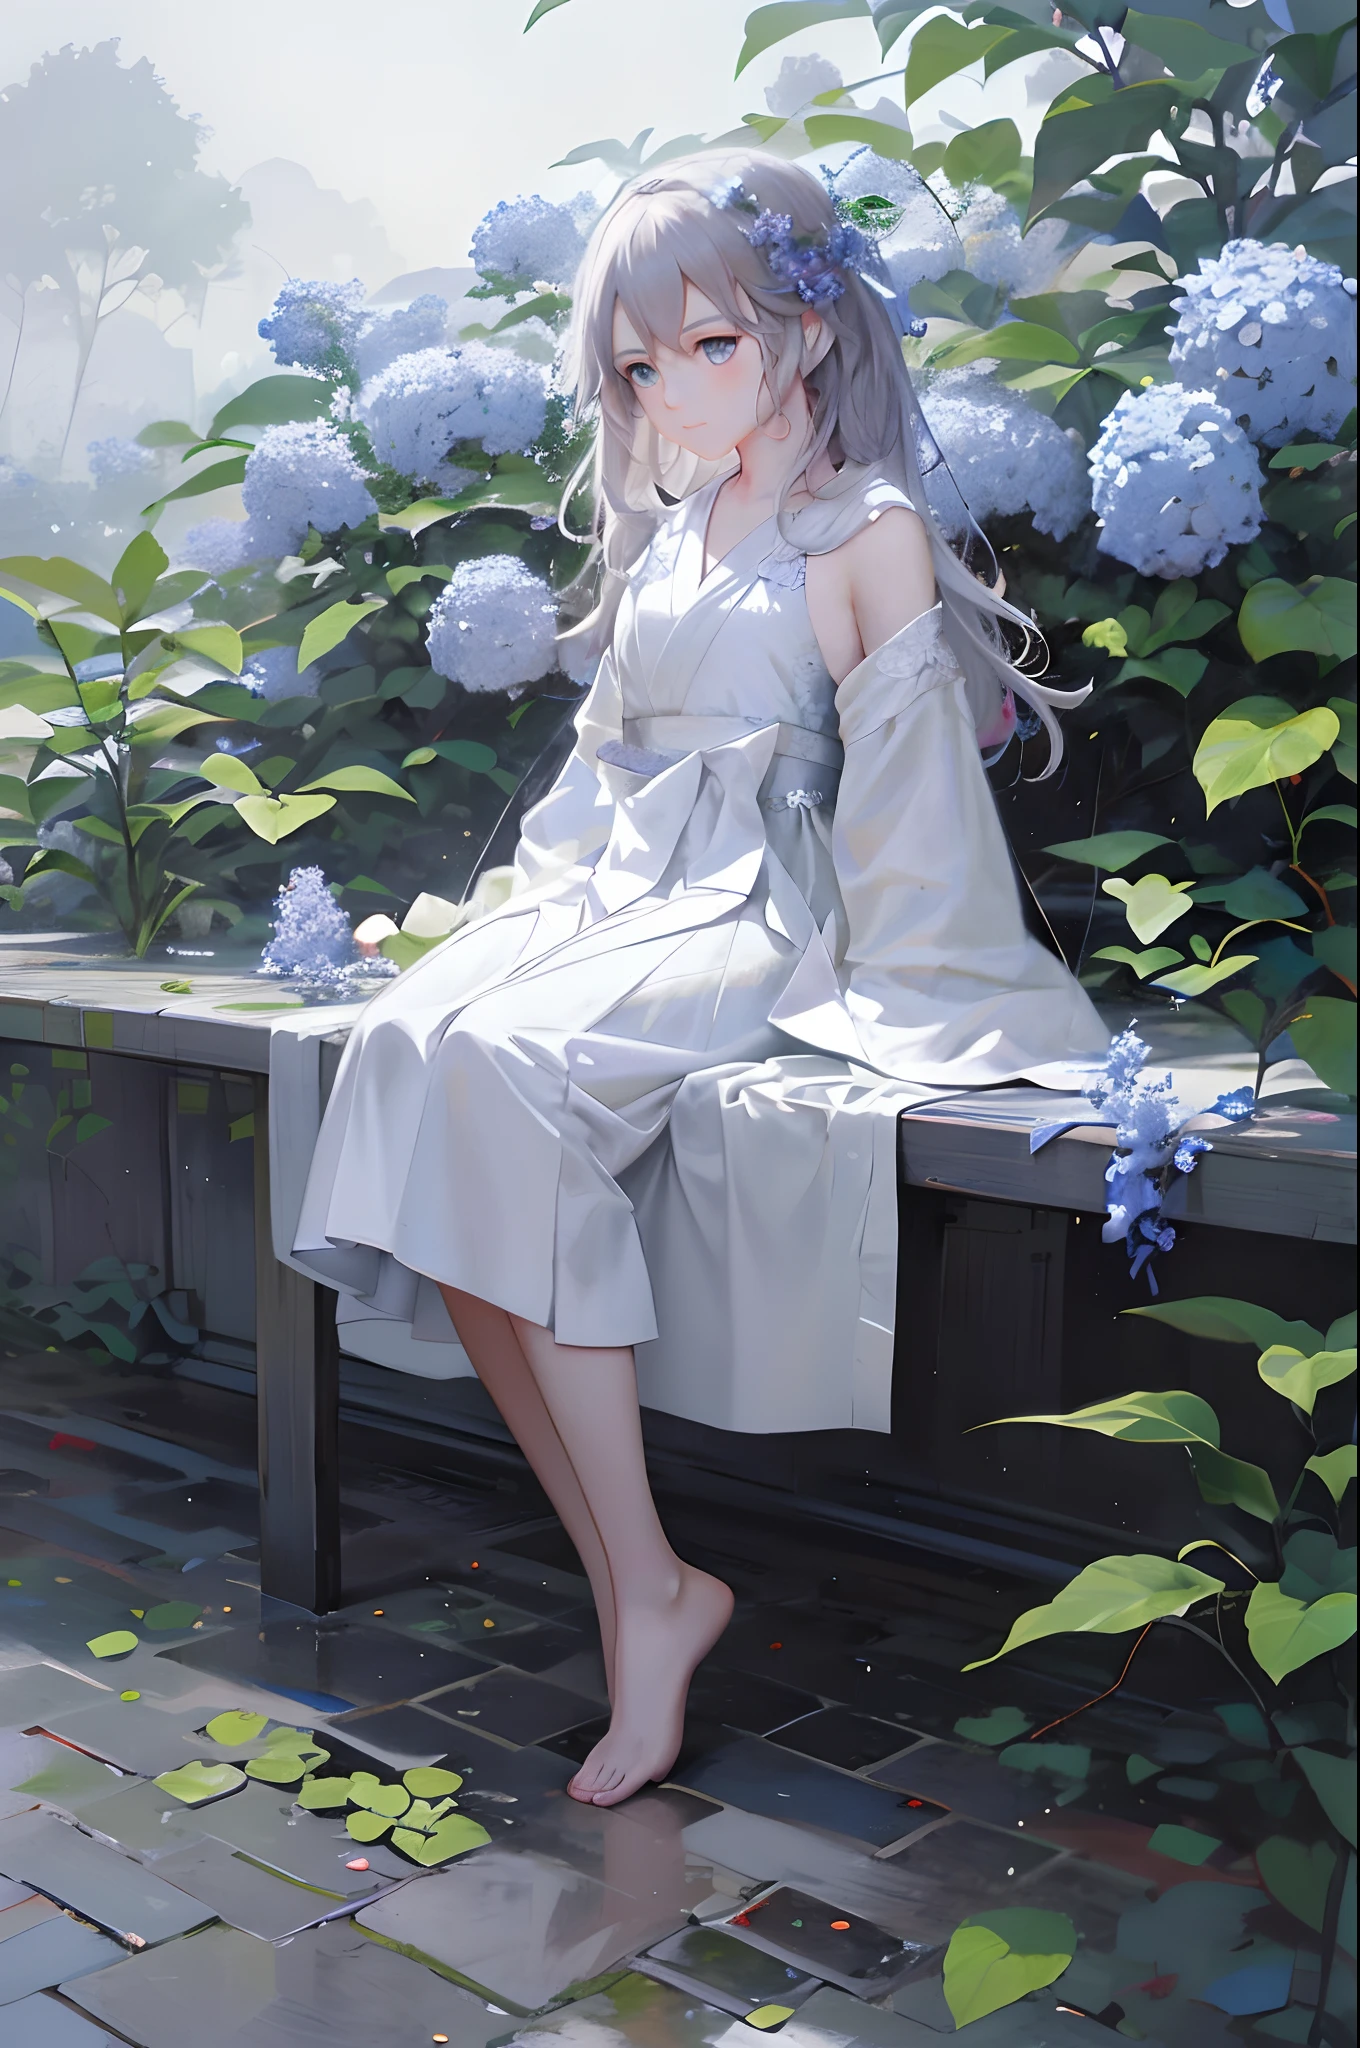 Anime girl sitting on bench，Flowers in the hair, Guviz-style artwork, Guweiz in Pixiv ArtStation, Guweiz on ArtStation Pixiv, Guviz, cute anime waifu in a nice dress, Beautiful anime artwork, Beautiful anime art, trending on cgstation, anime visual of a cute girl